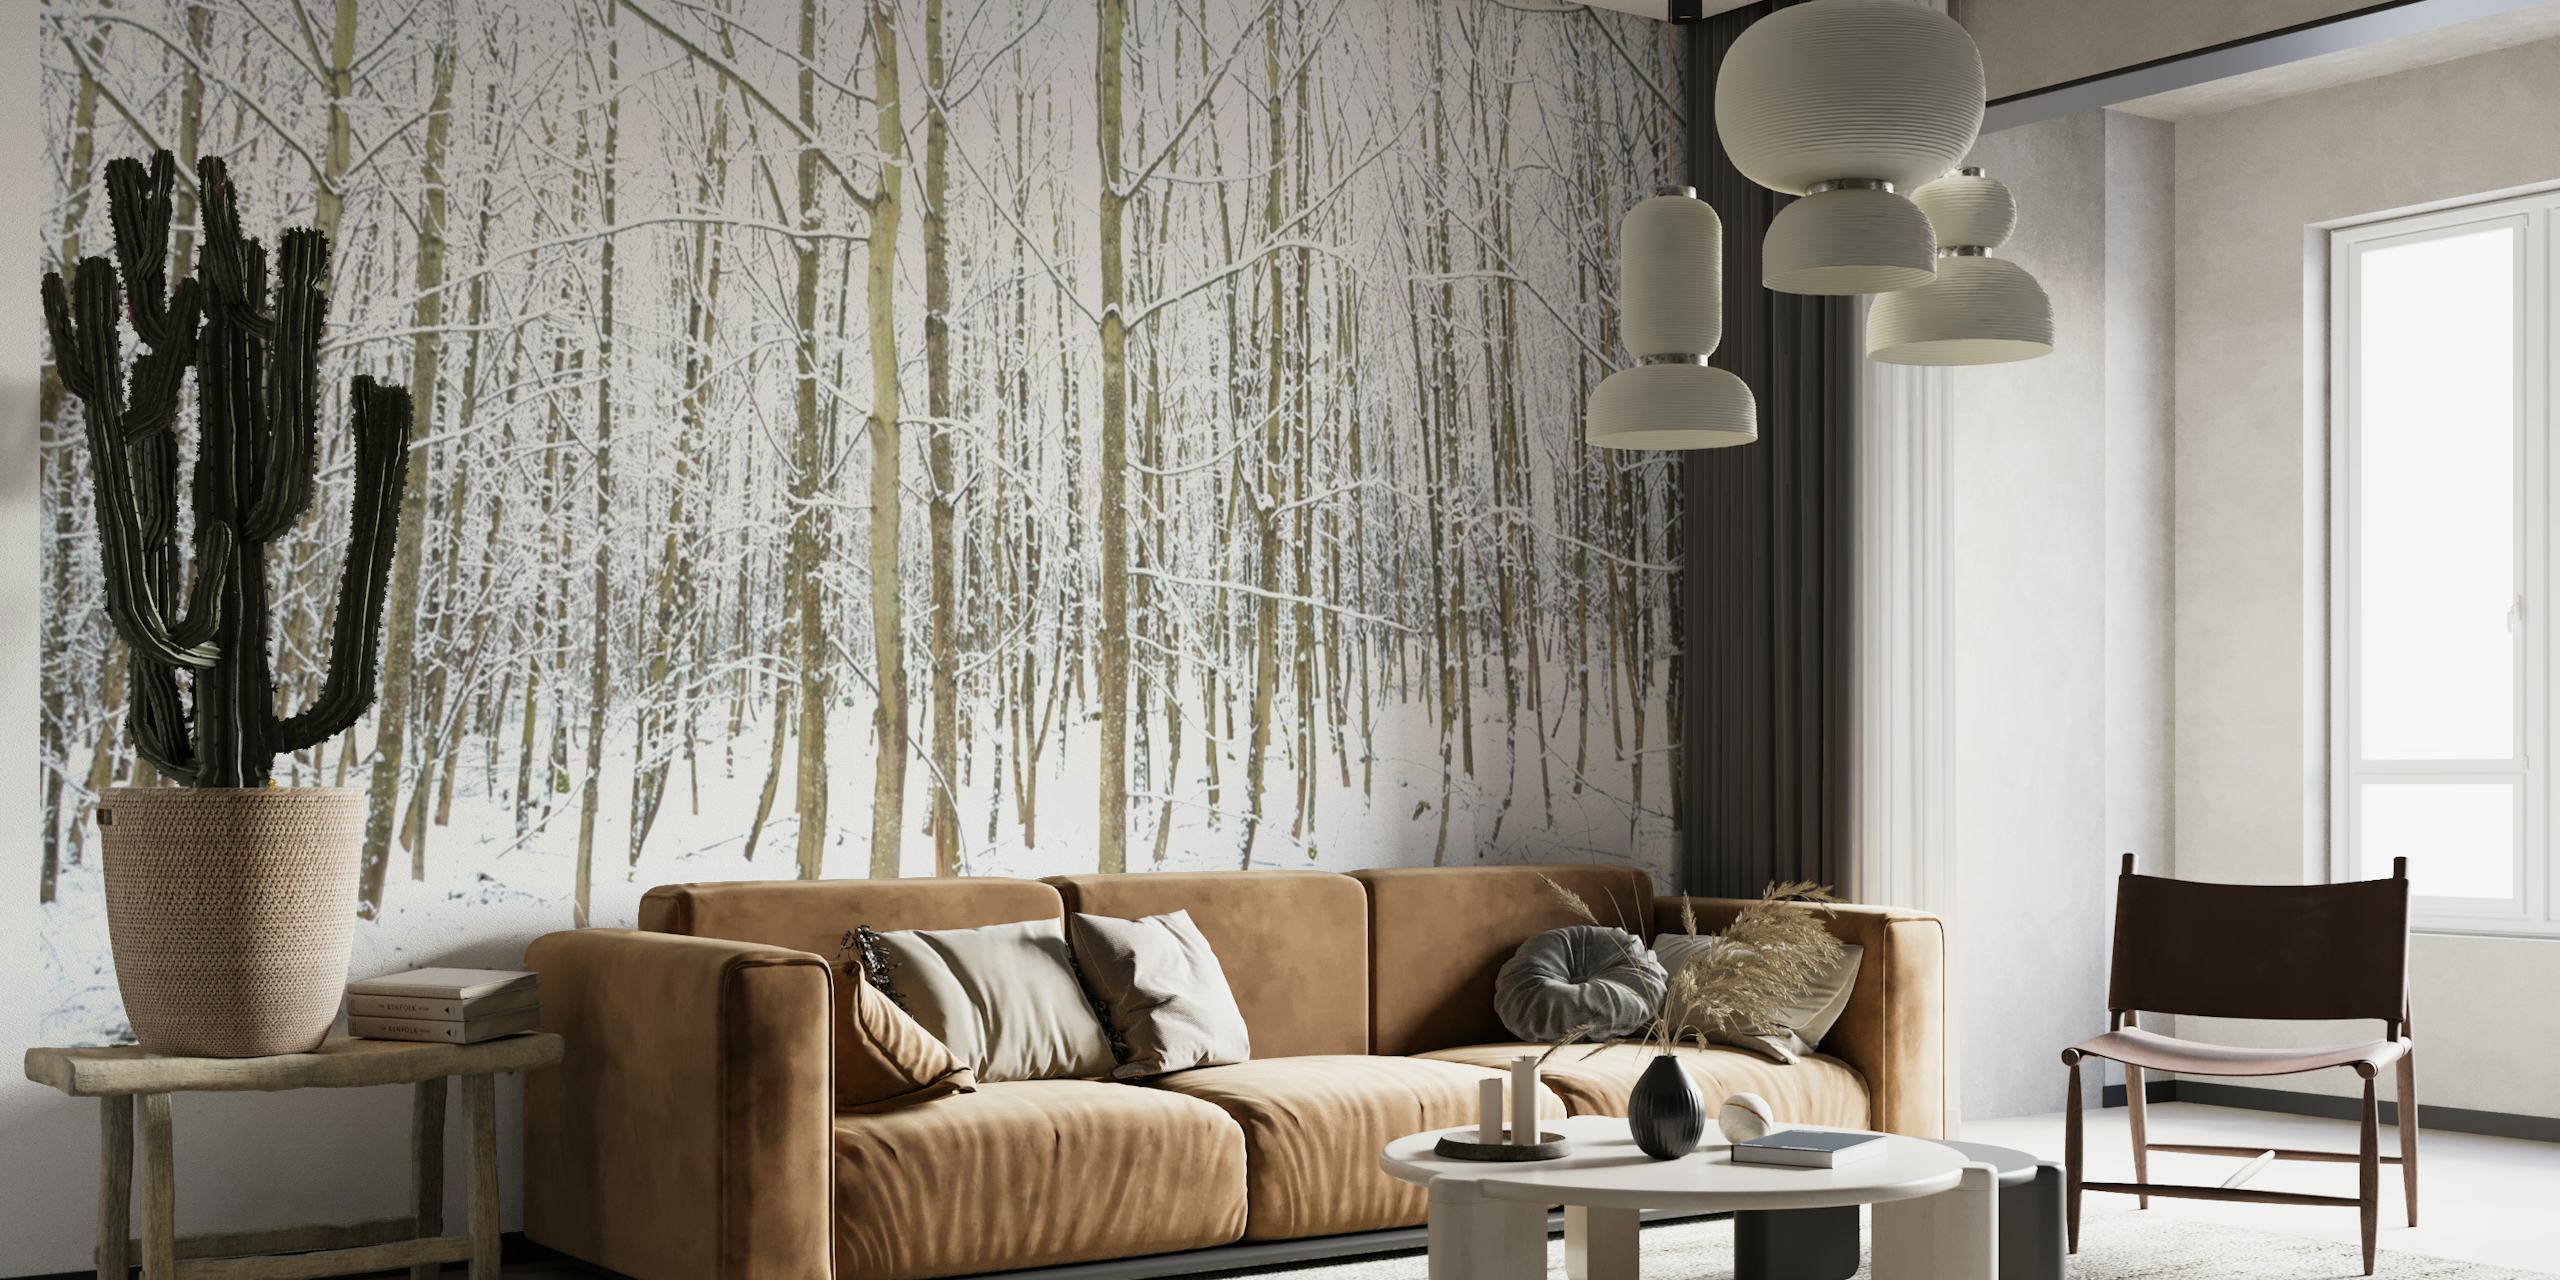 Winterly Forest wall mural with snow-covered trees